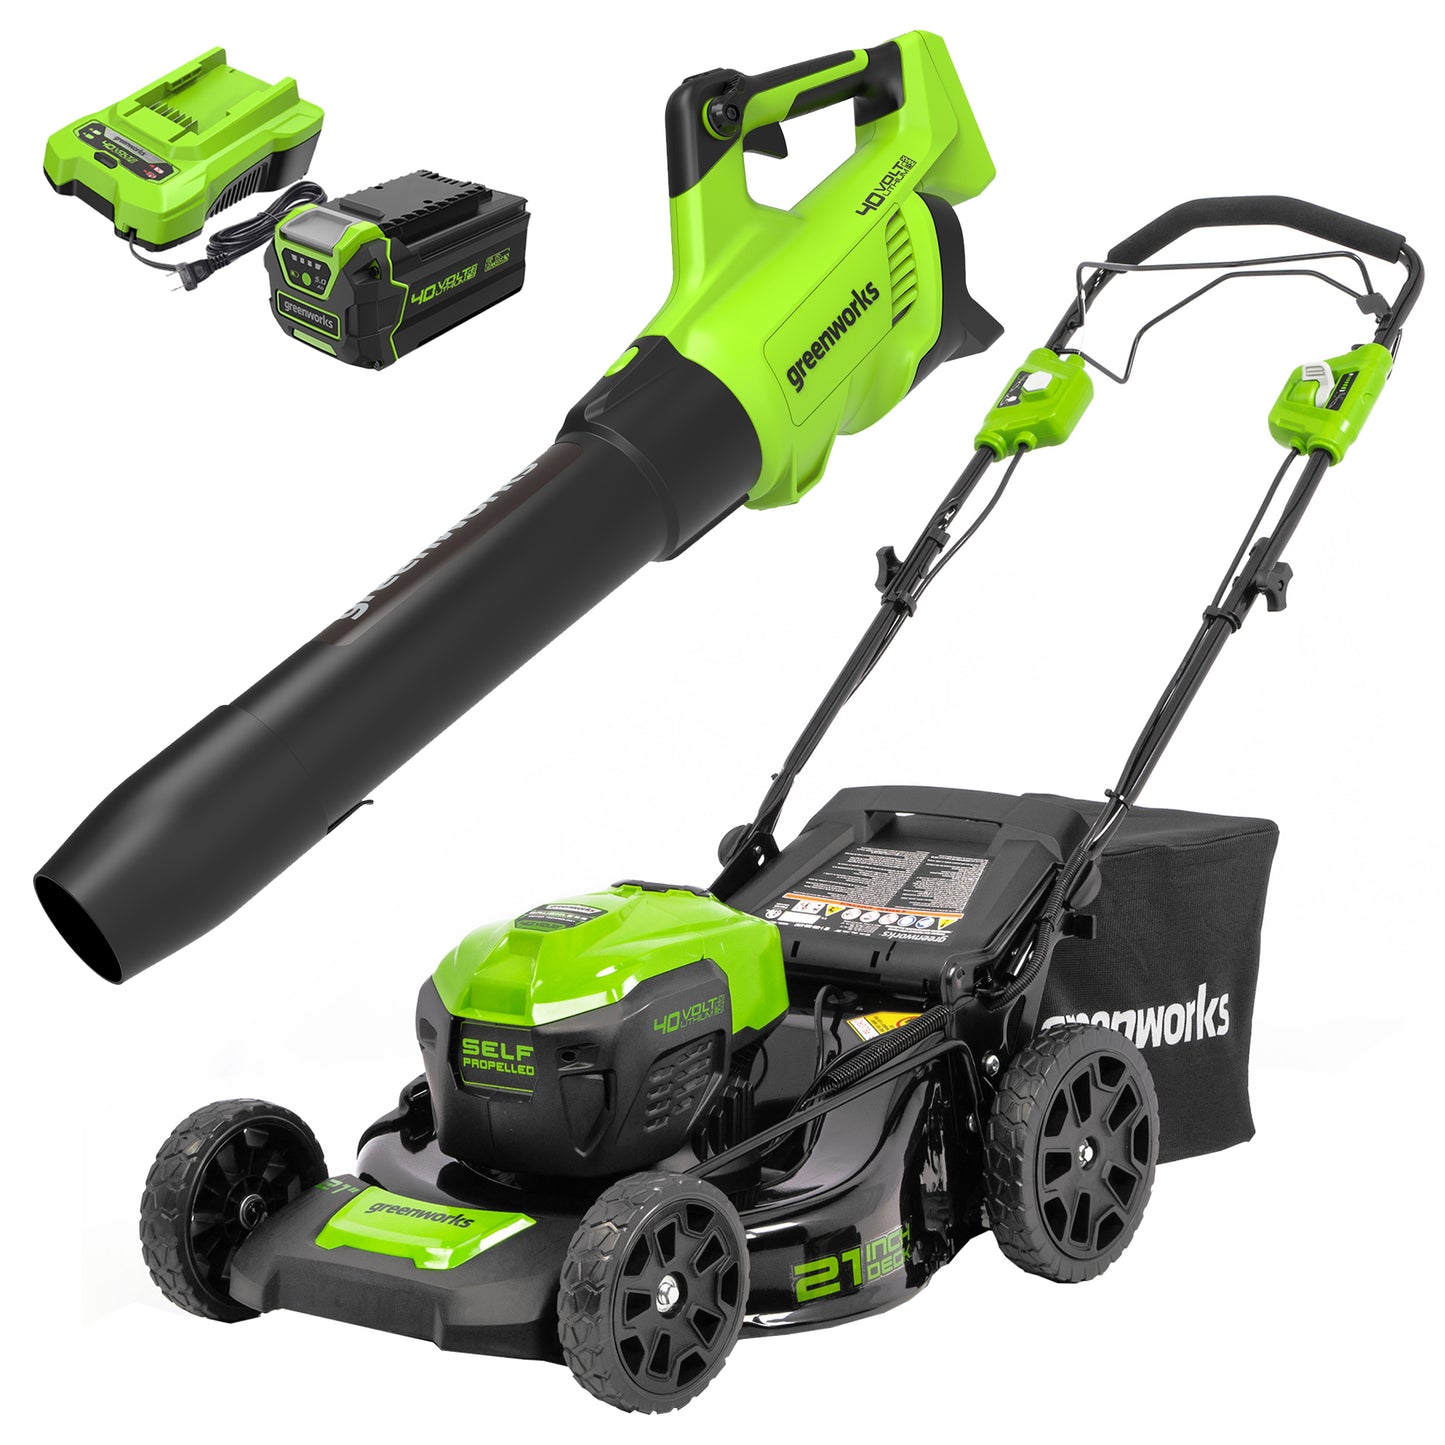 greenworkstools-40V 21 Self-Propelled Mower/Axial Blower Combo Kit w/ 5.0Ah USB Battery & Charger